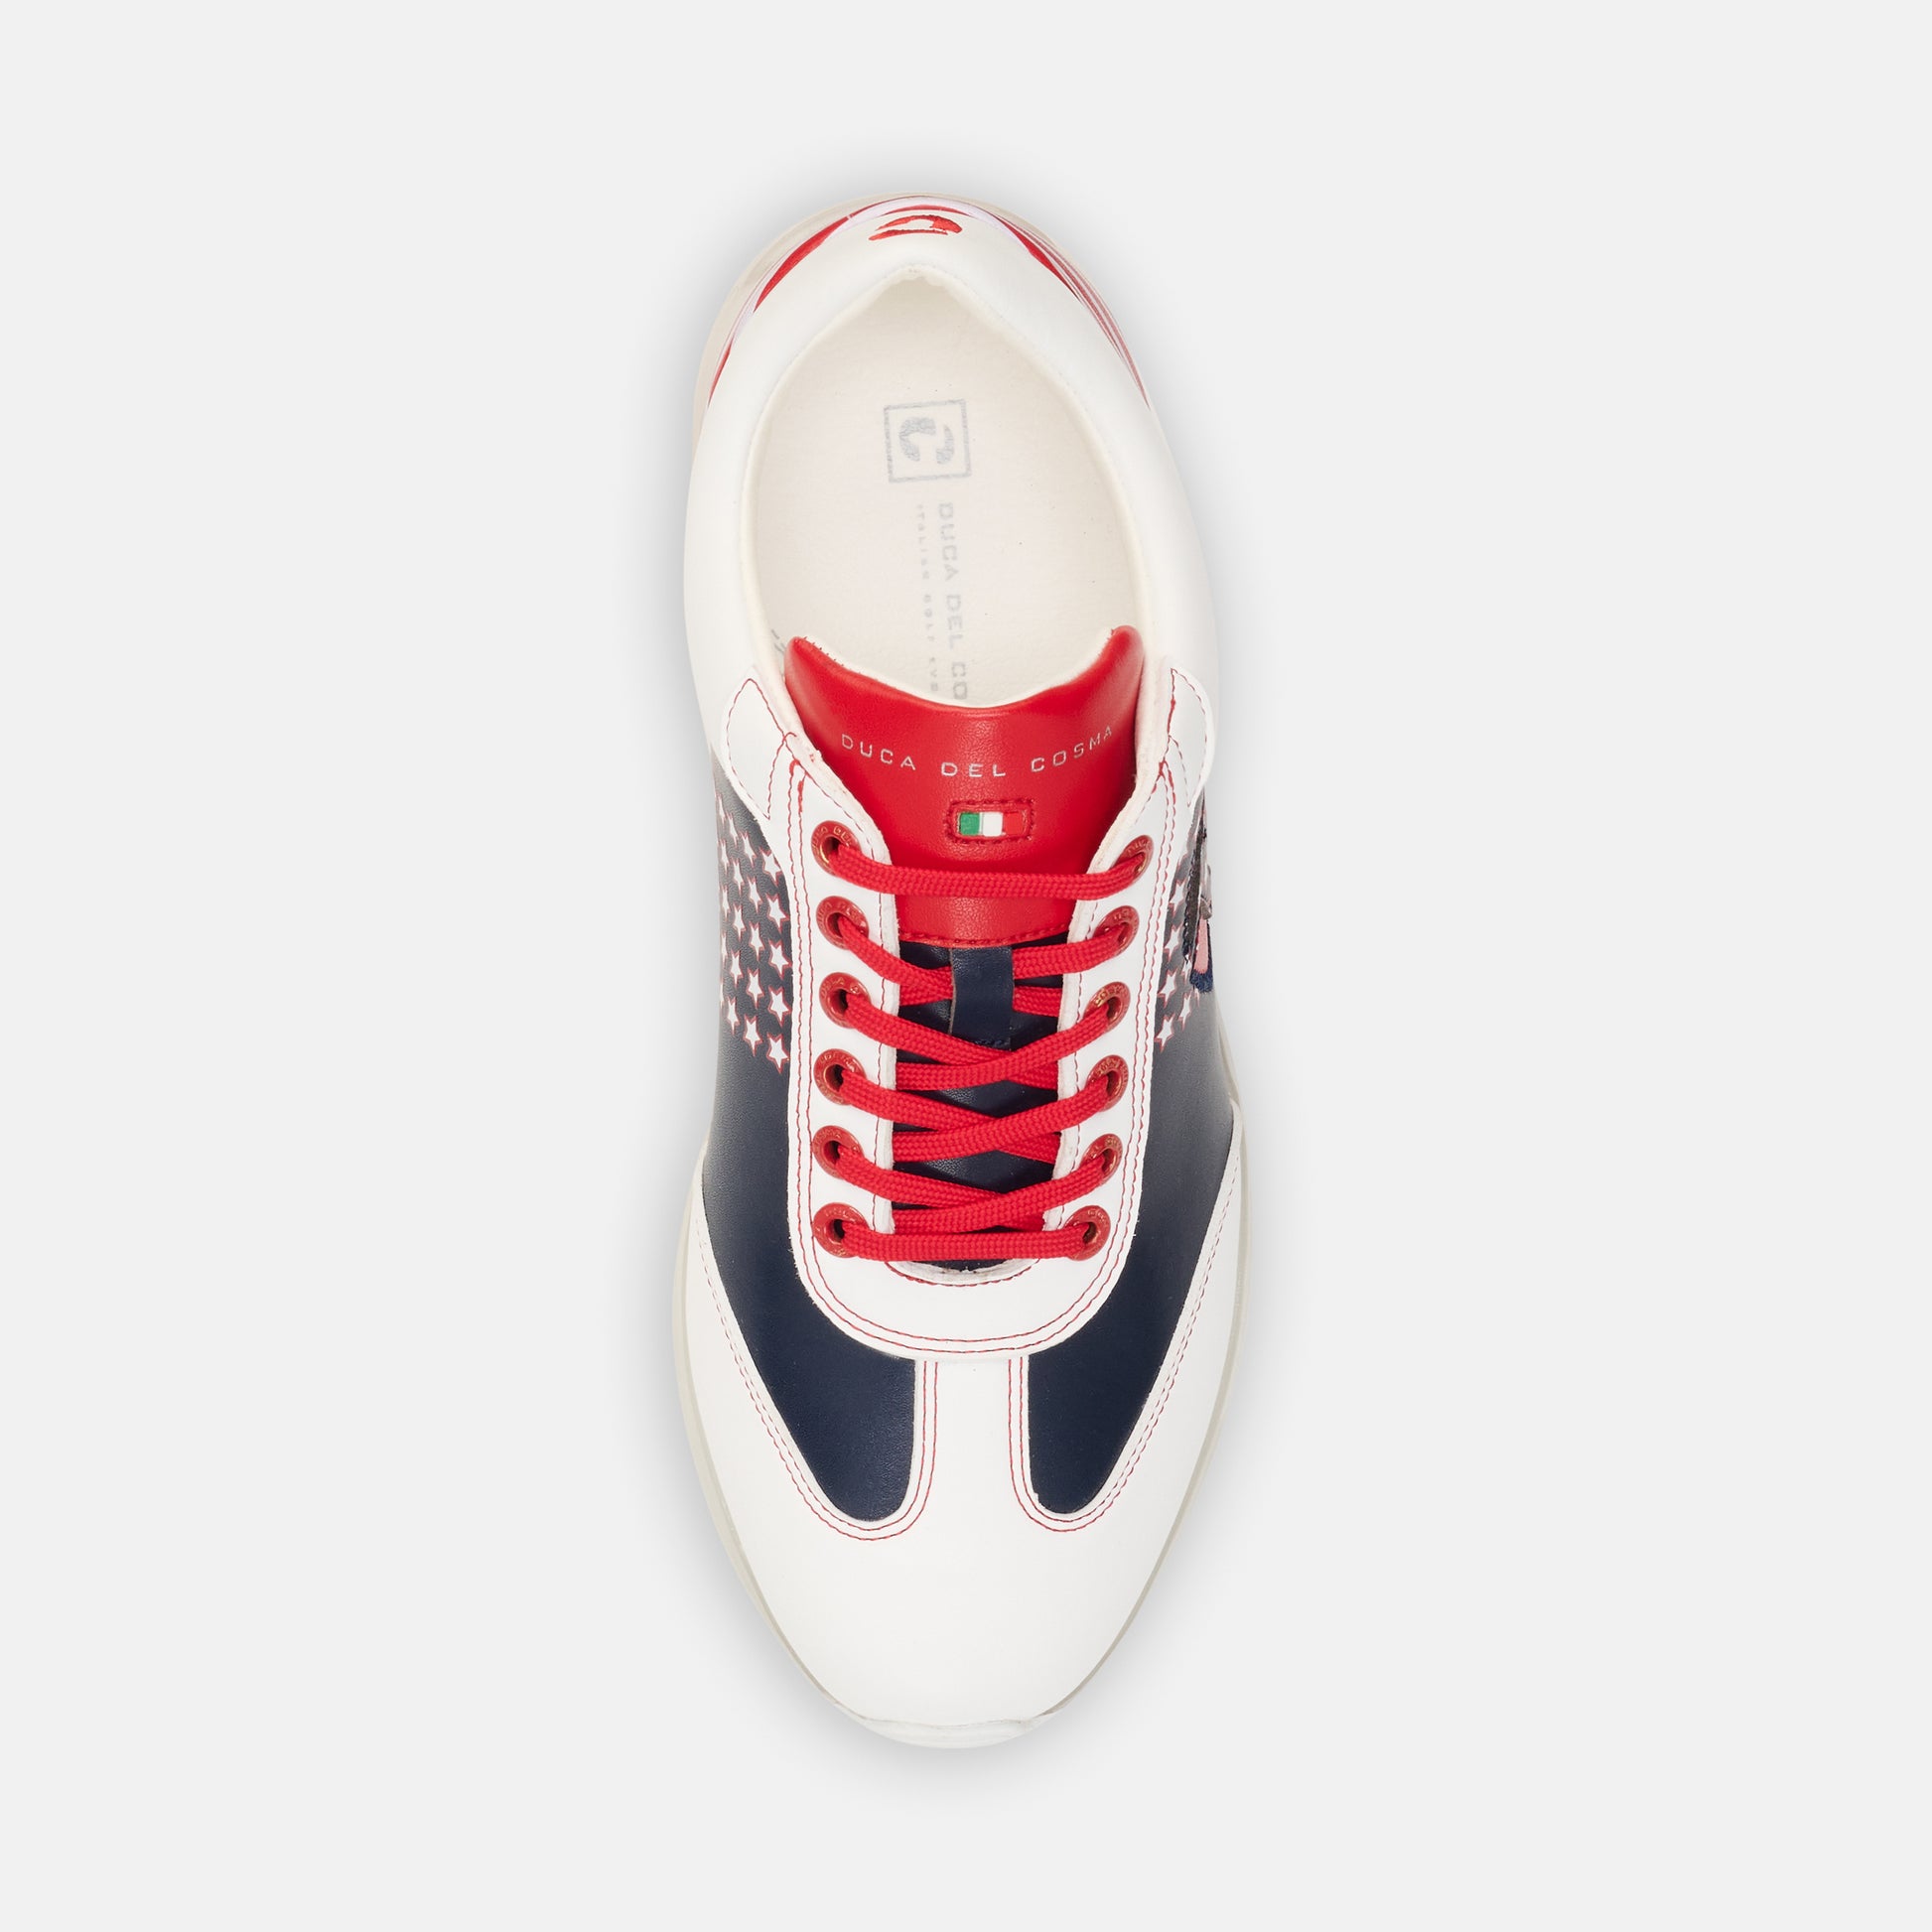 Women's Golf Shoe, Red Golf Shoes, Blue Golf Shoes, White Golf Shoes, Waterproof, Leather, Spikeless Golf Shoes